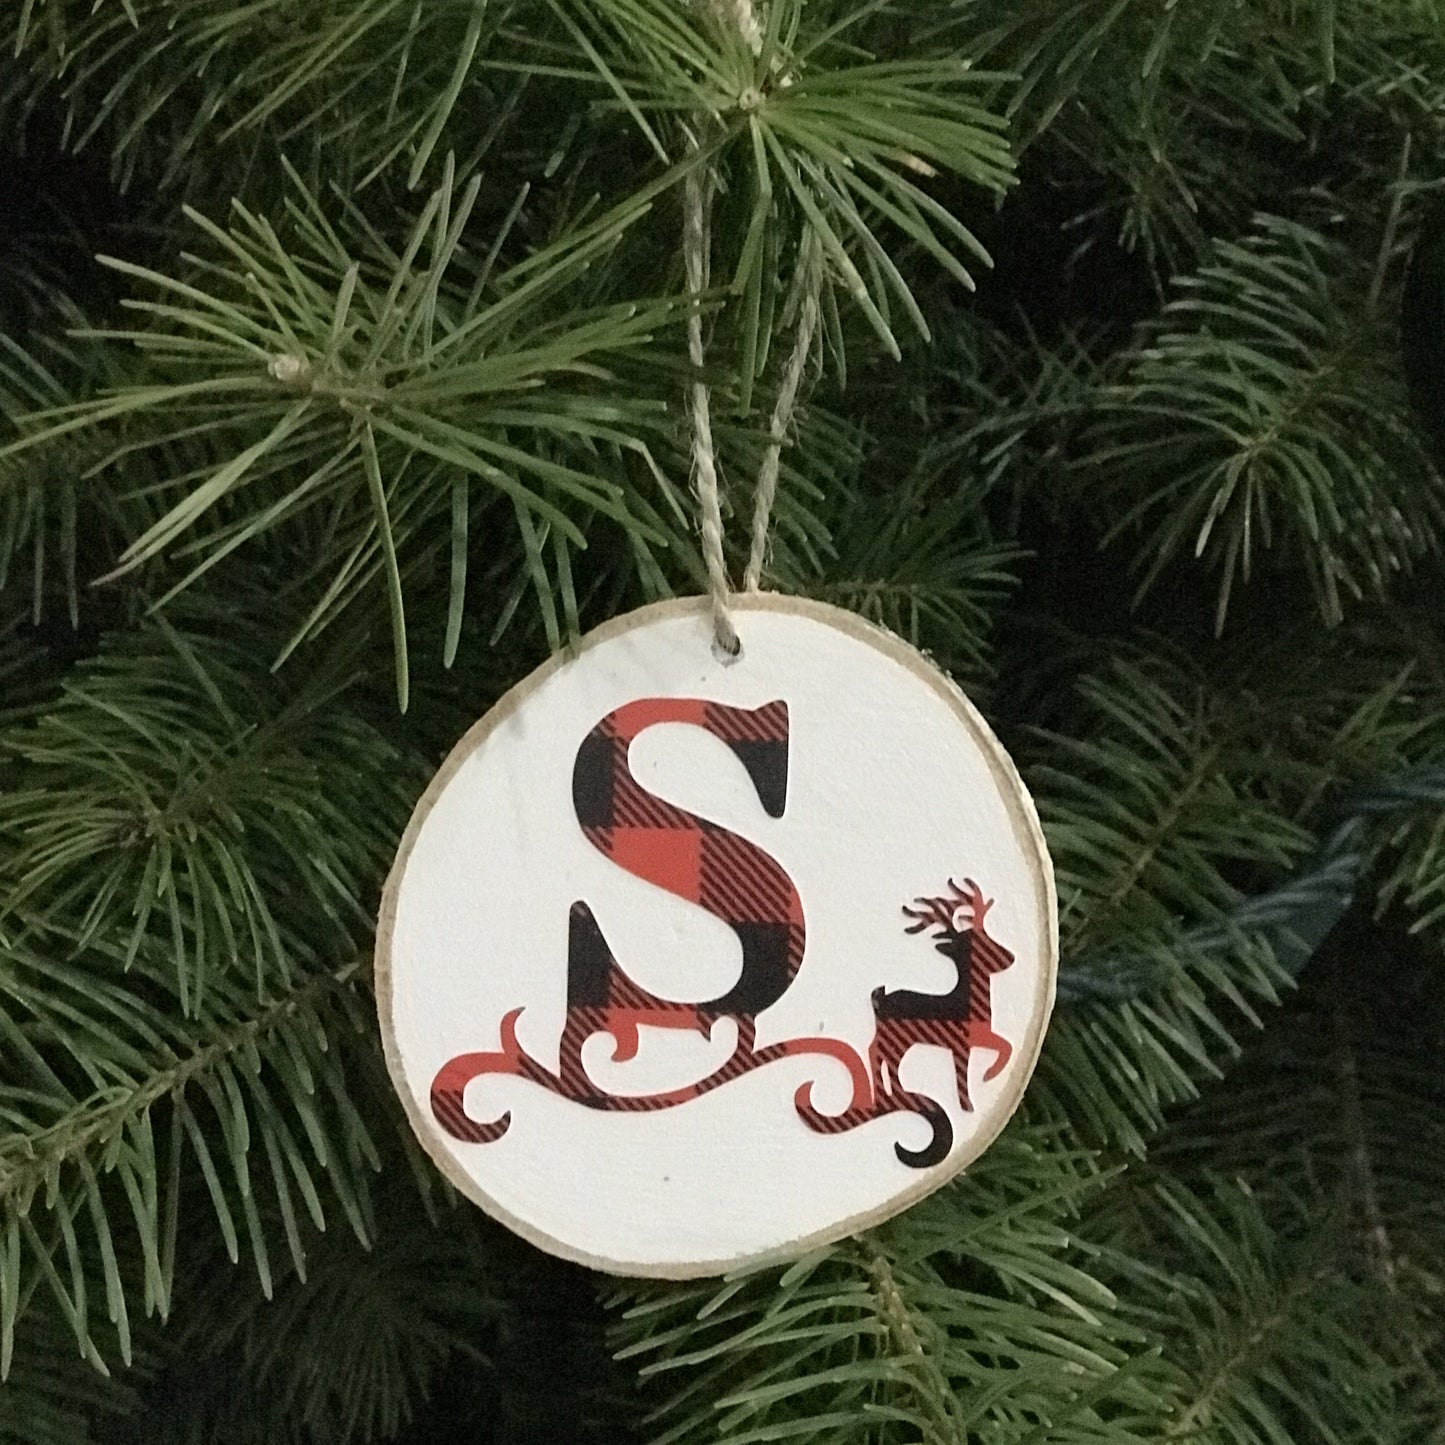 christmas ornament, wood slice, initial, letter ornament, buffalo plaid, red and black, name ornaments, reindeer, letter S